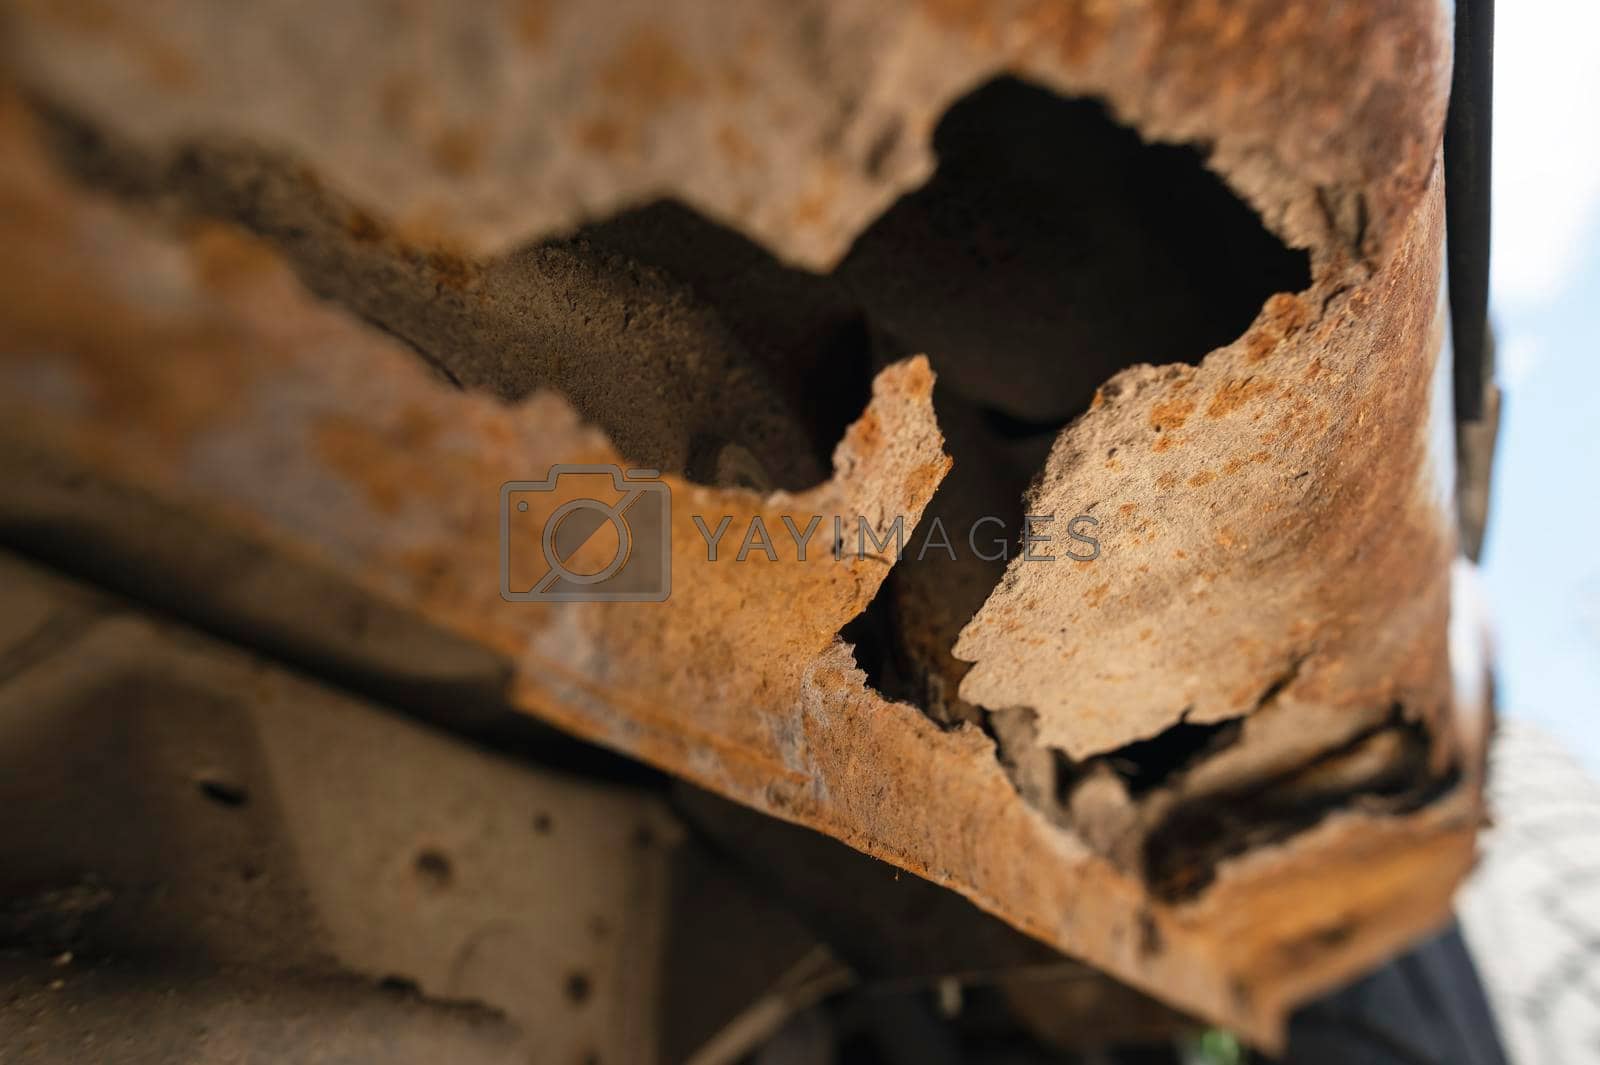 Royalty free image of Rusty car body damaged by corrosion with hole on threshold by yanik88